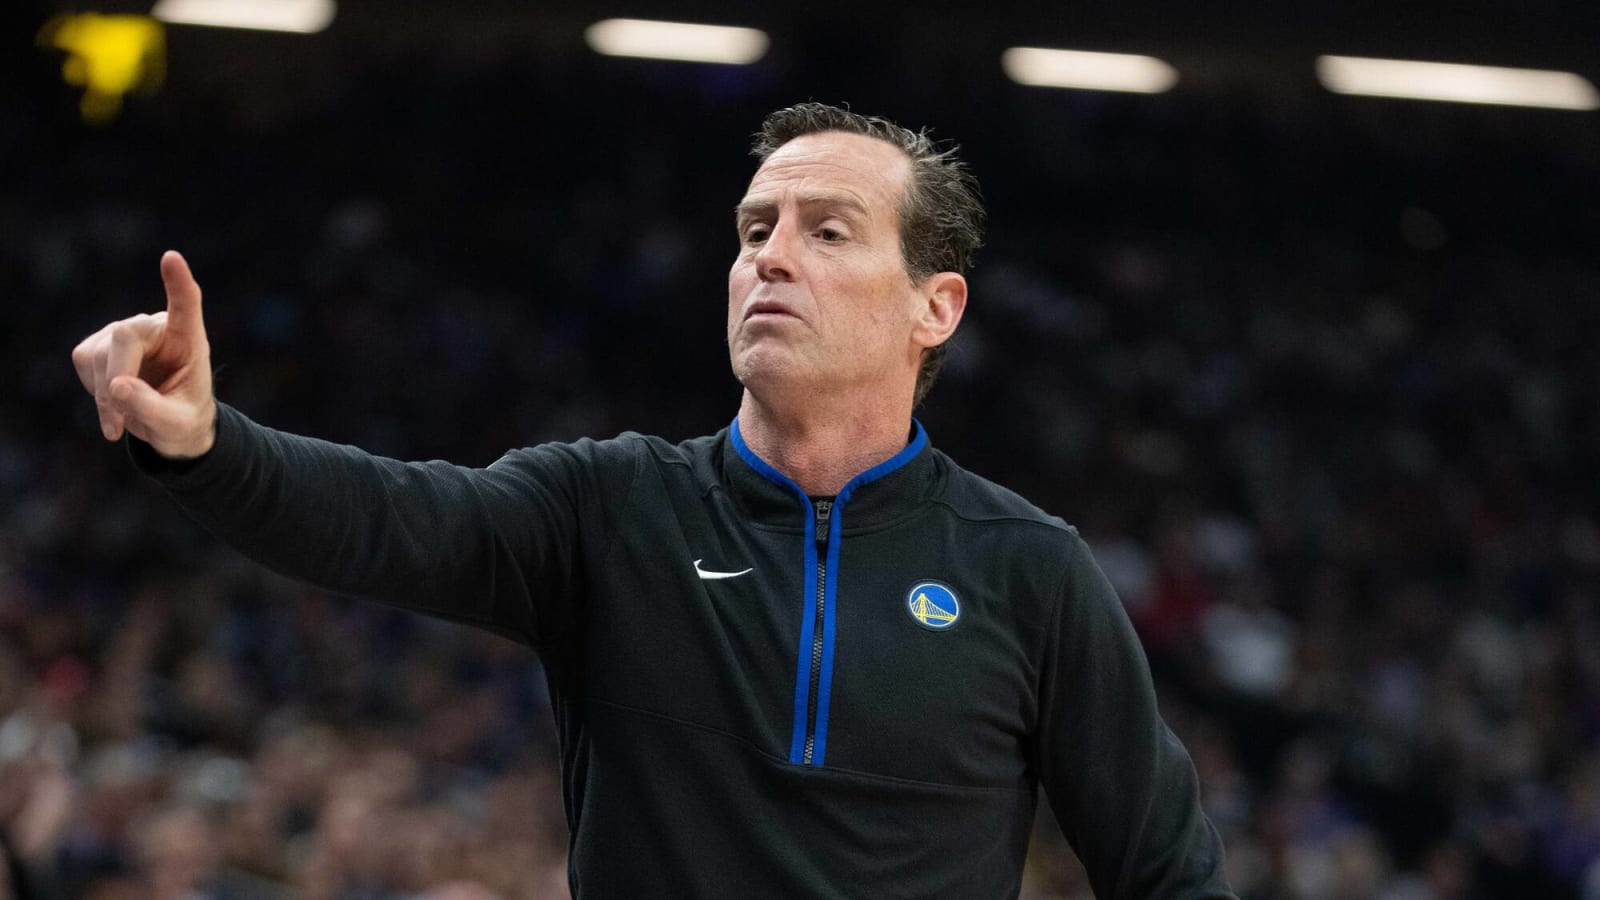 Bucks Expected to Interview Kenny Atkinson, James Borrego, Others for Coaching Job